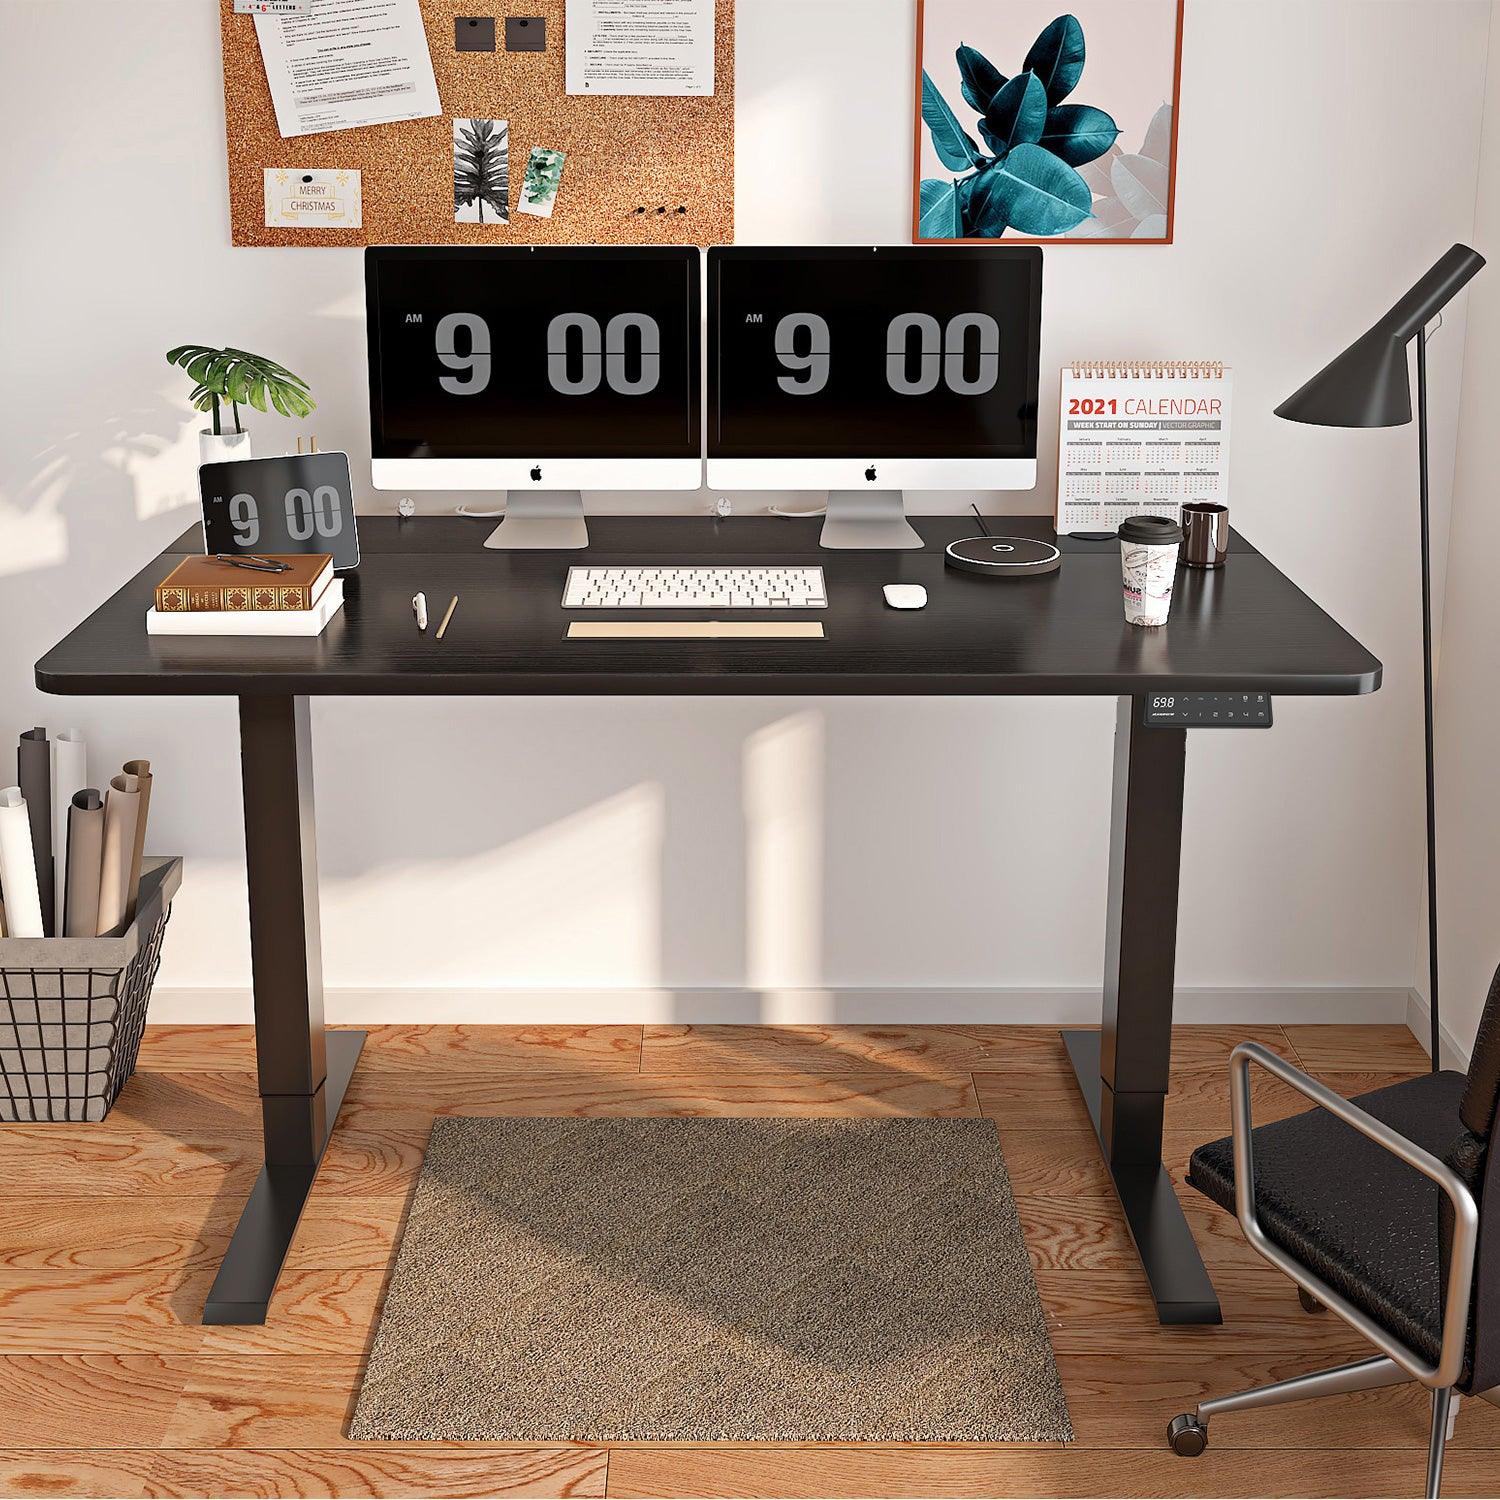 stading desk 140x70cm electric computer desk S2 Pro for home office use-MaidesiteUK